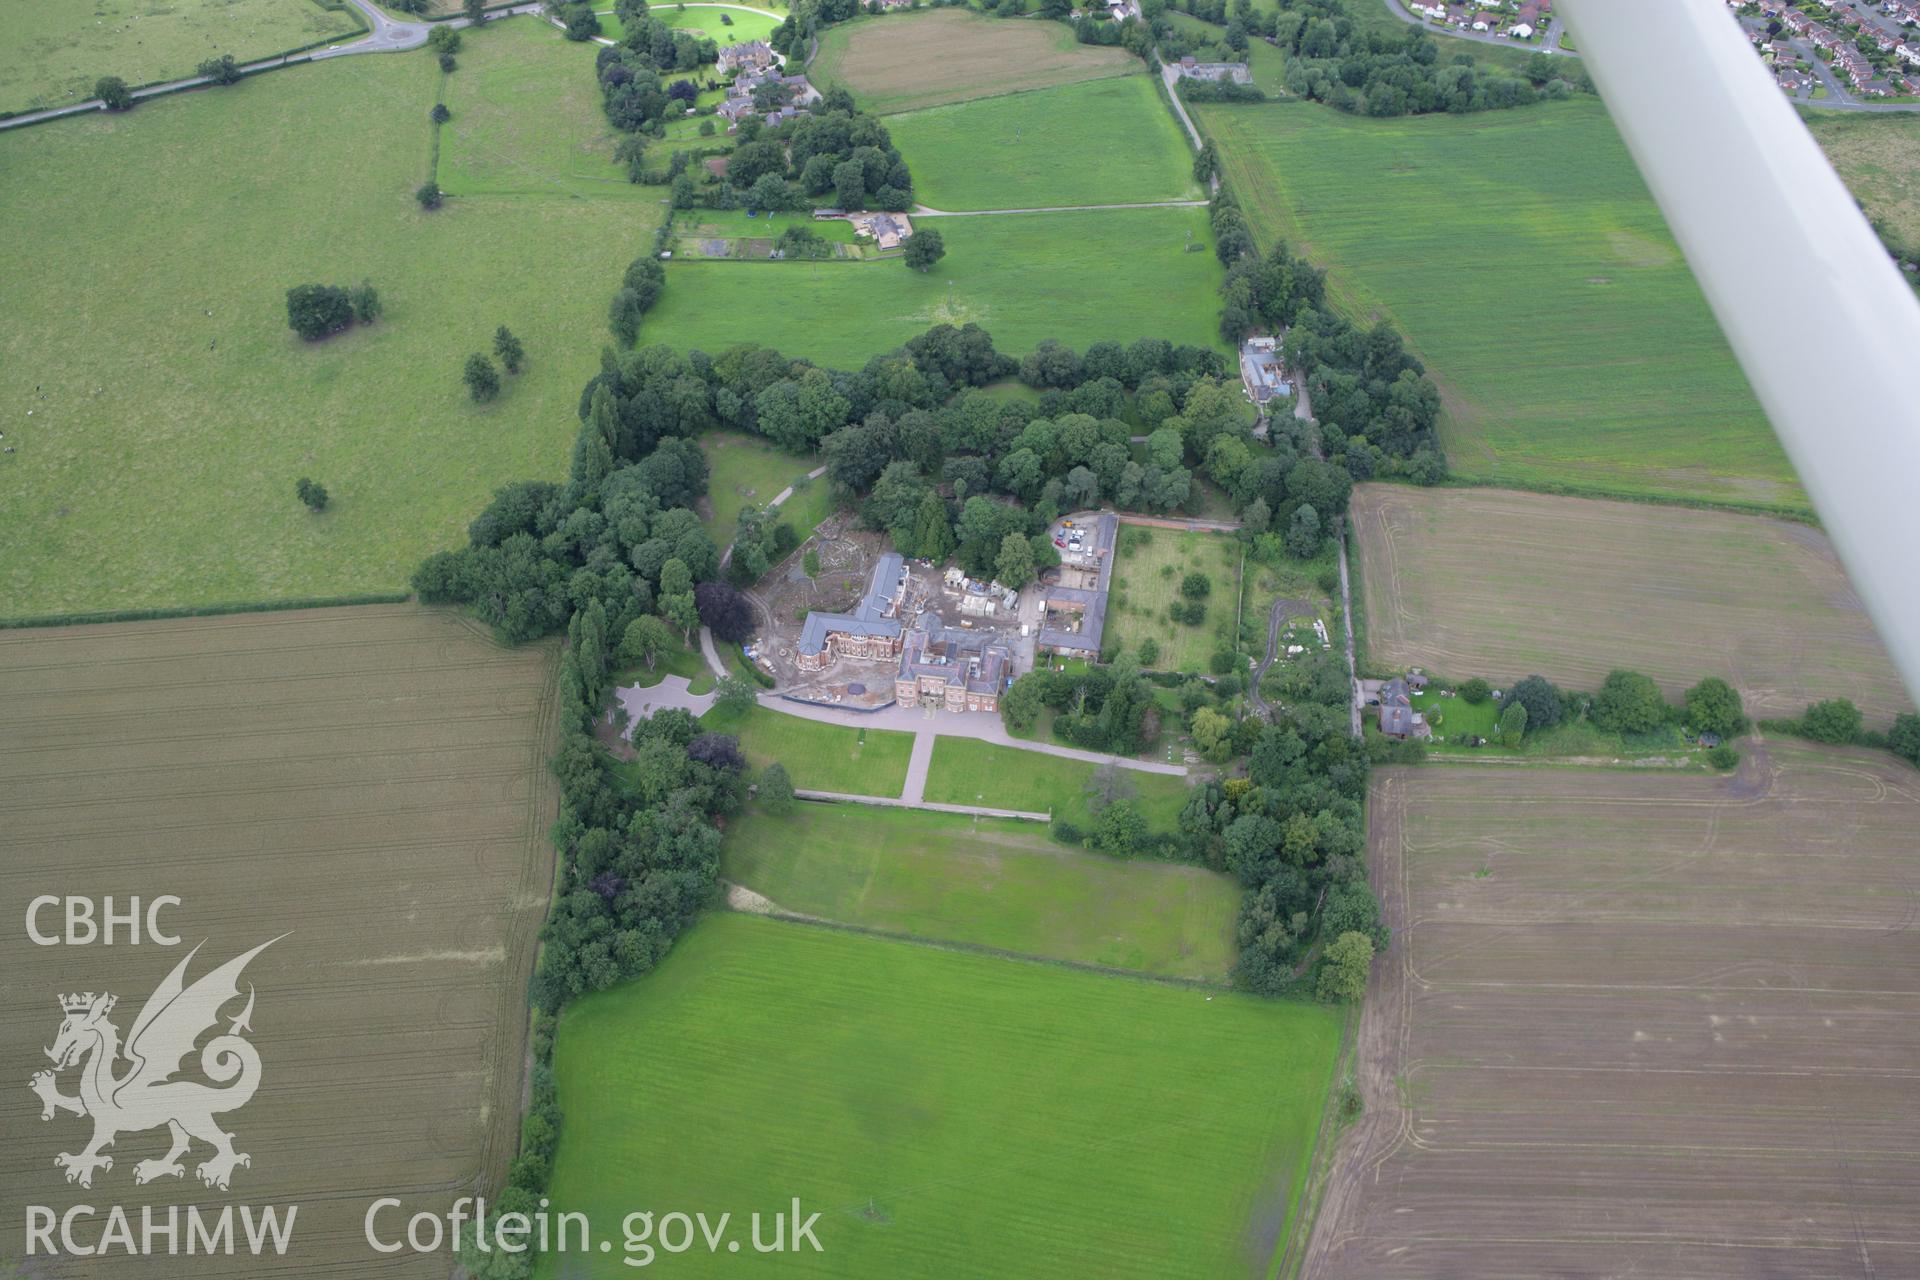 RCAHMW colour oblique aerial photograph of Trevalyn House, Rossett. Taken on 24 July 2007 by Toby Driver